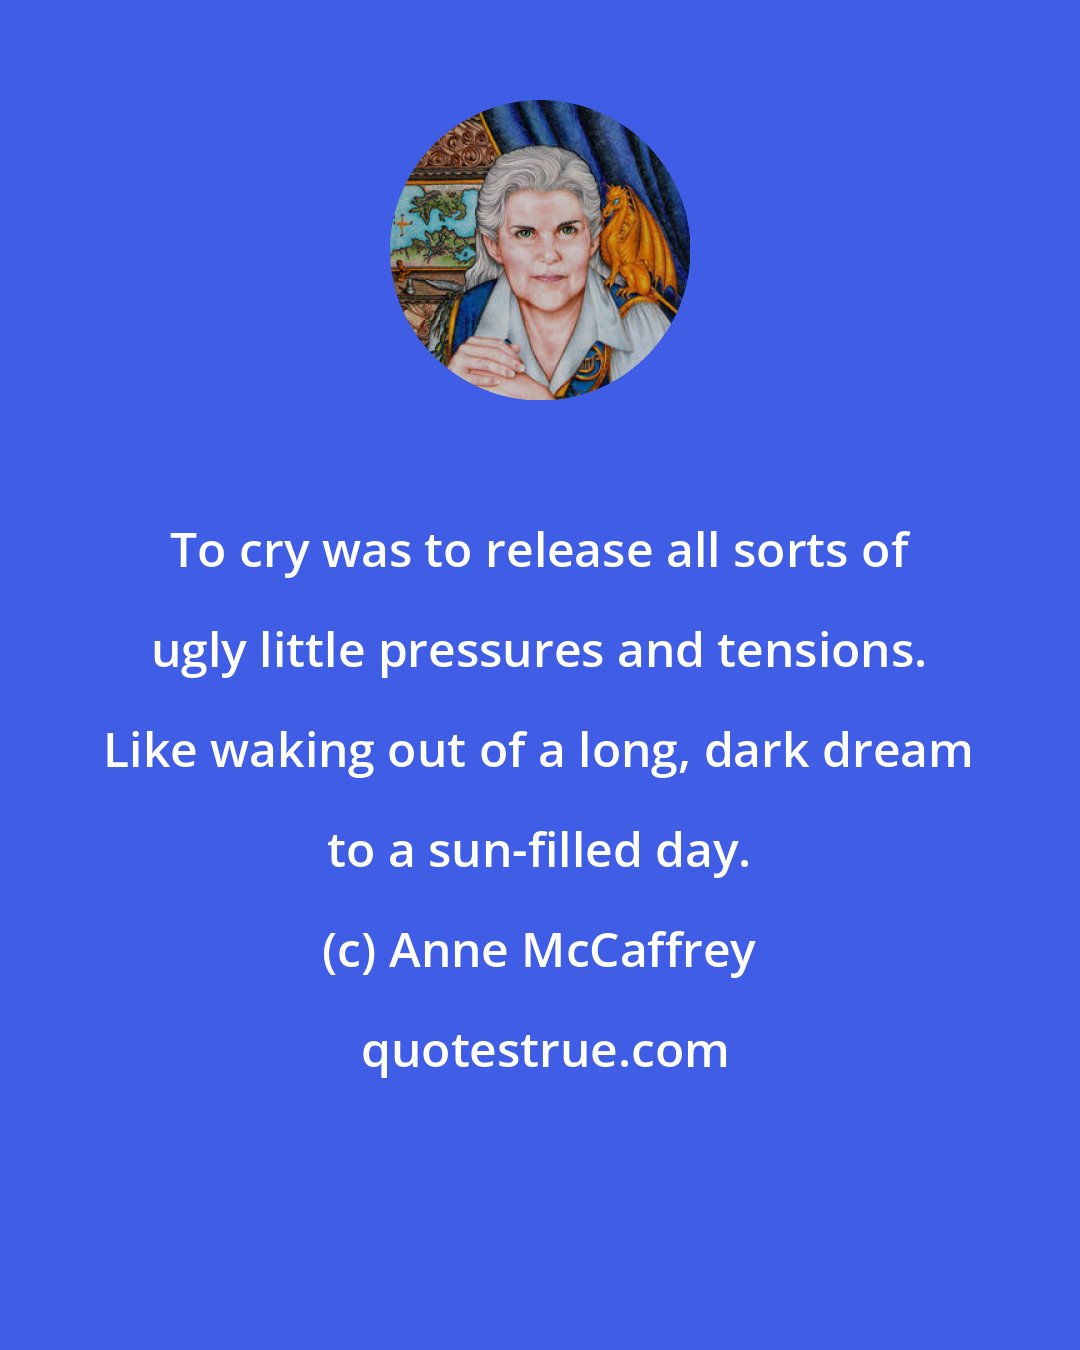 Anne McCaffrey: To cry was to release all sorts of ugly little pressures and tensions. Like waking out of a long, dark dream to a sun-filled day.